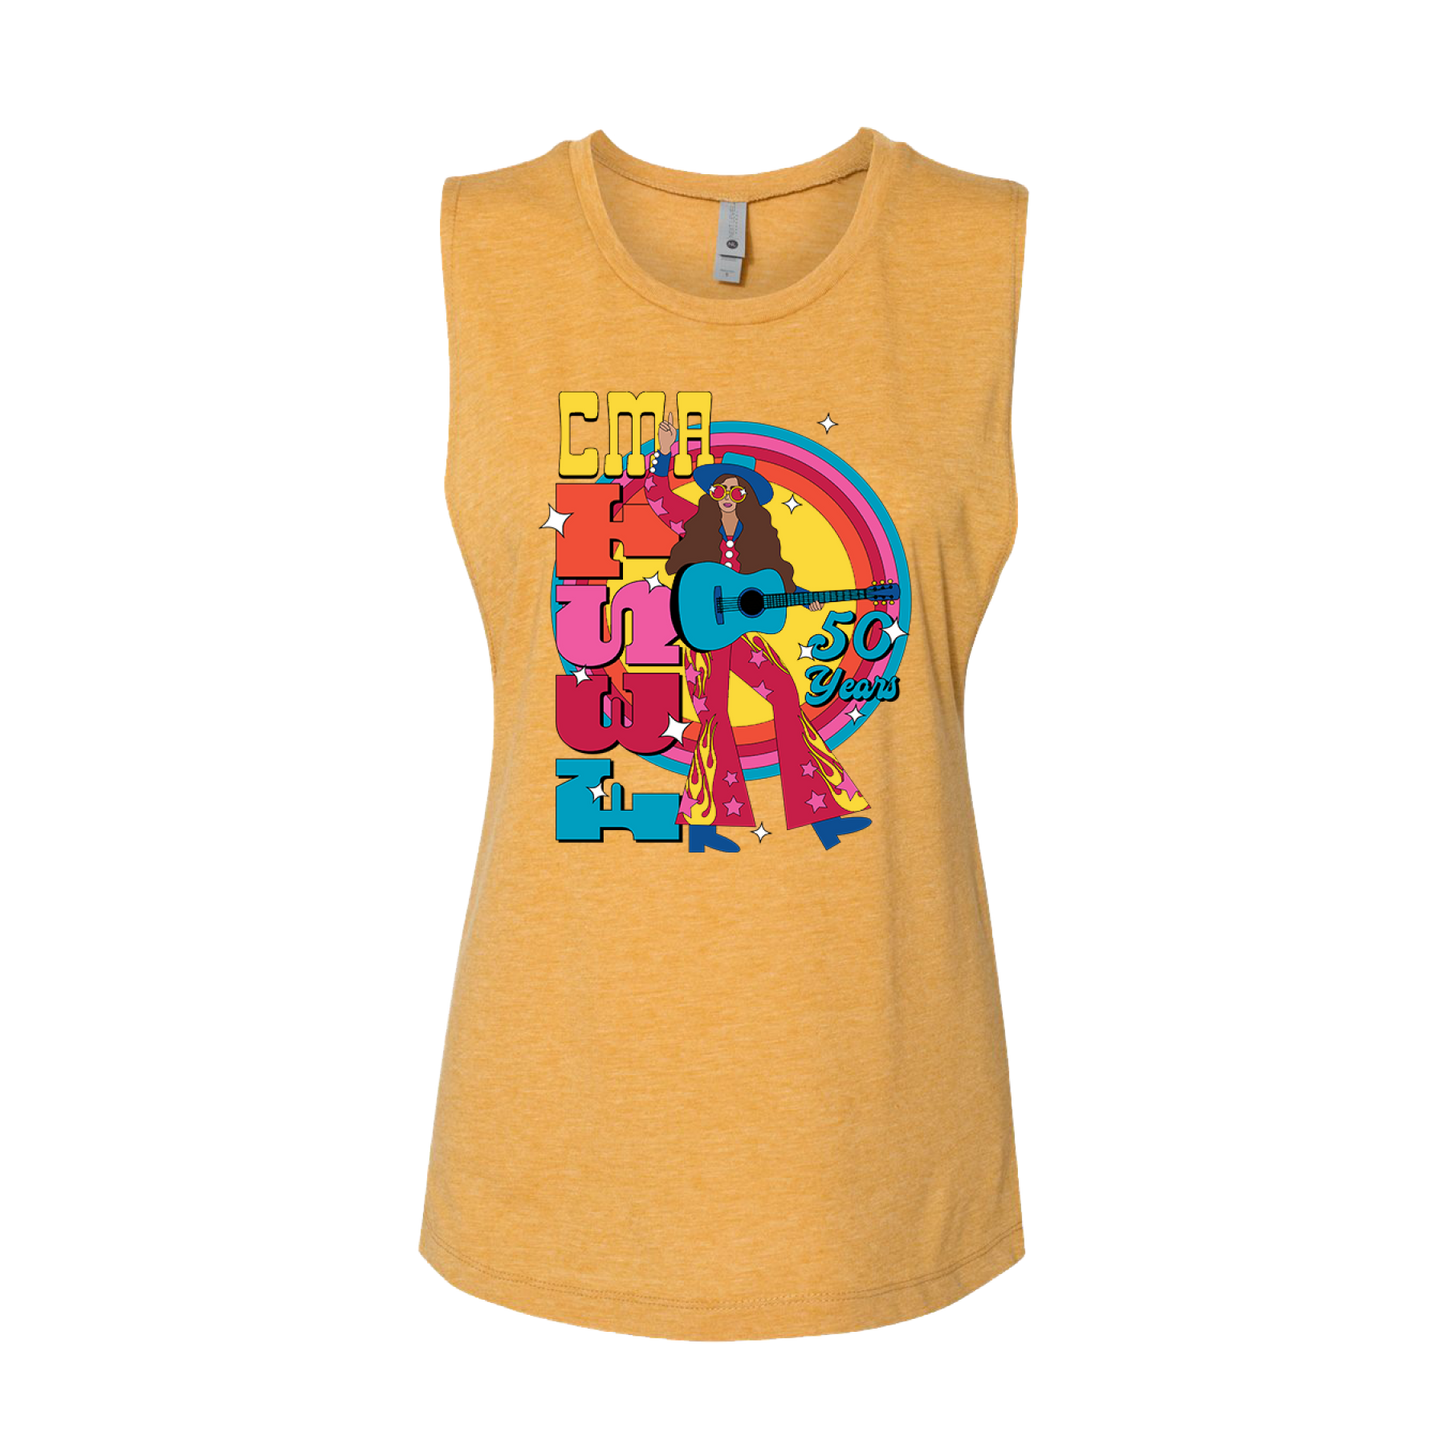 Official CMA Fest Merchandise. This relaxed ladies muscle tank is a 65/35 polyester/combed ringspun cotton blend. It features a colorful retro CMA fest design.